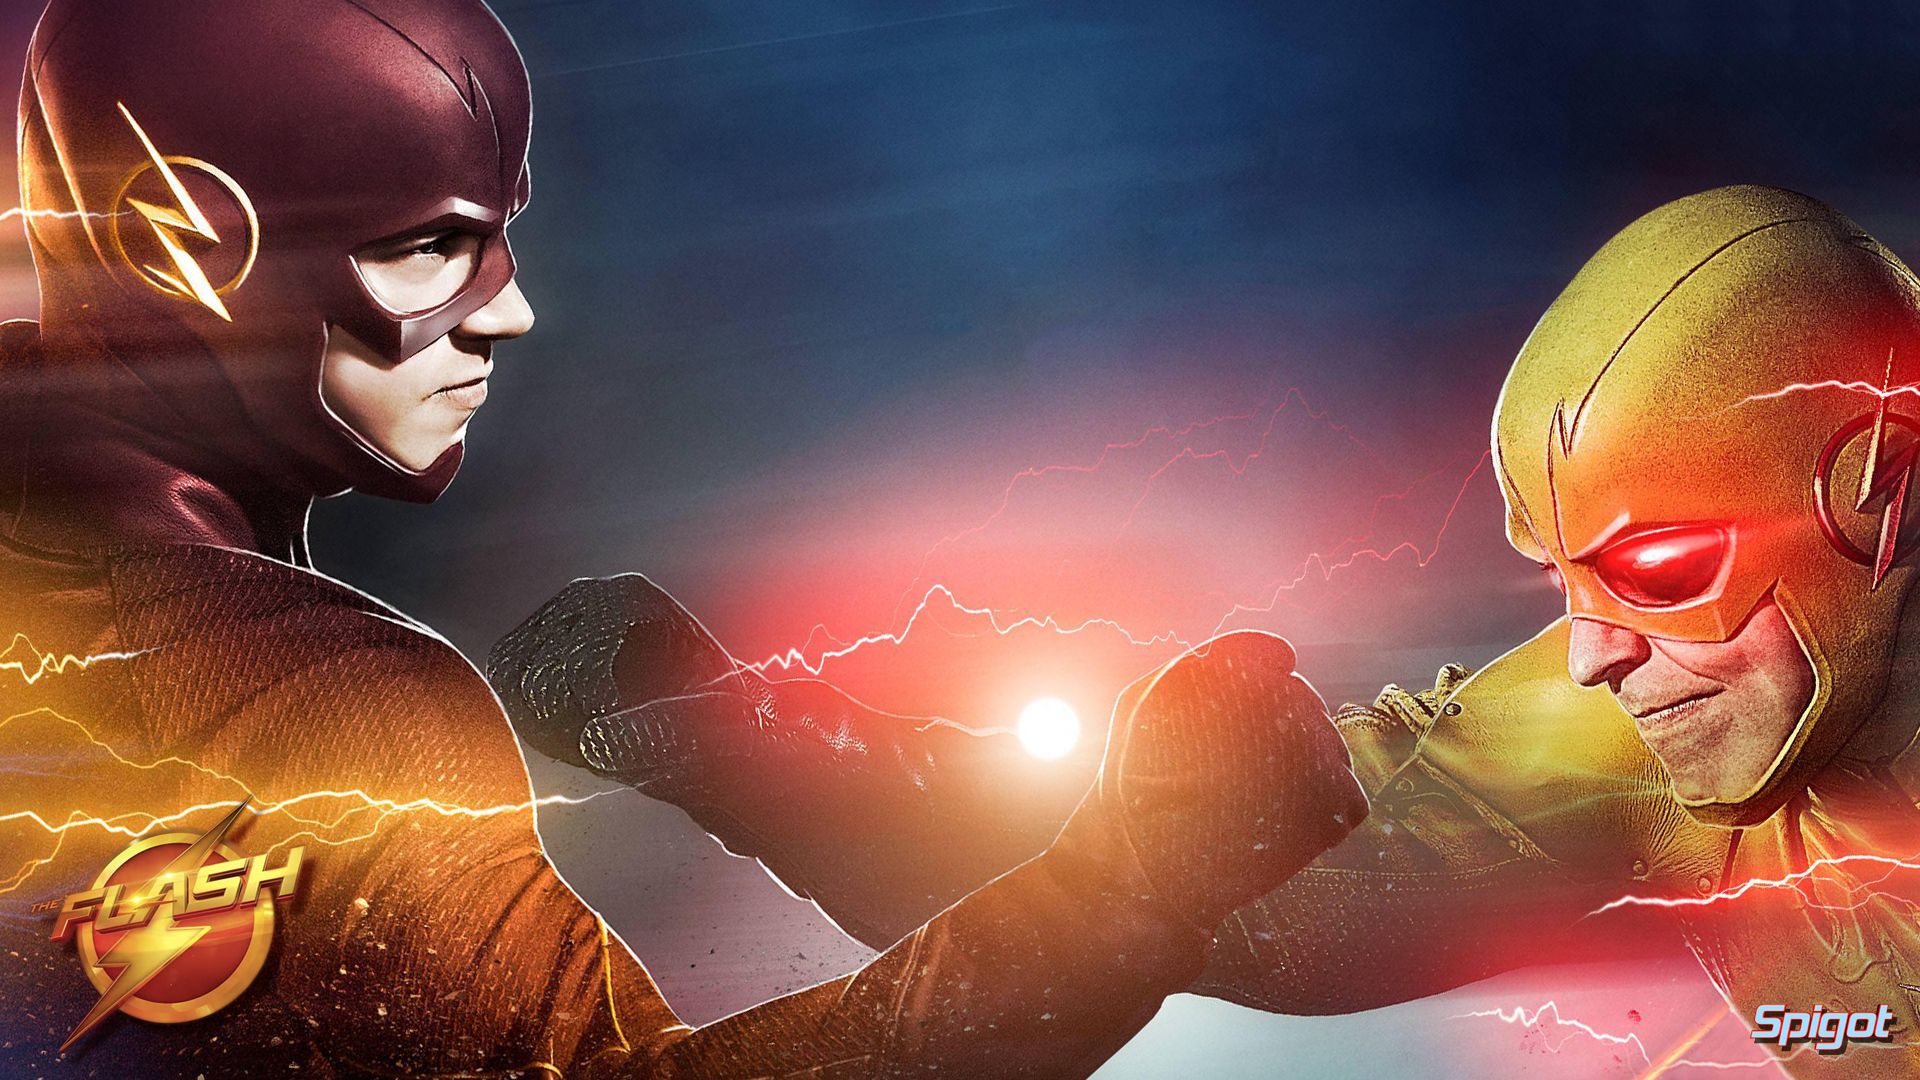 Free download Reverse Flash Wallpaper Top Reverse Flash Background [1920x1080] for your Desktop, Mobile & Tablet. Explore Flash Vs. Reverse Flash Wallpaper. Flash vs Reverse Flash Wallpaper, Flash Vs